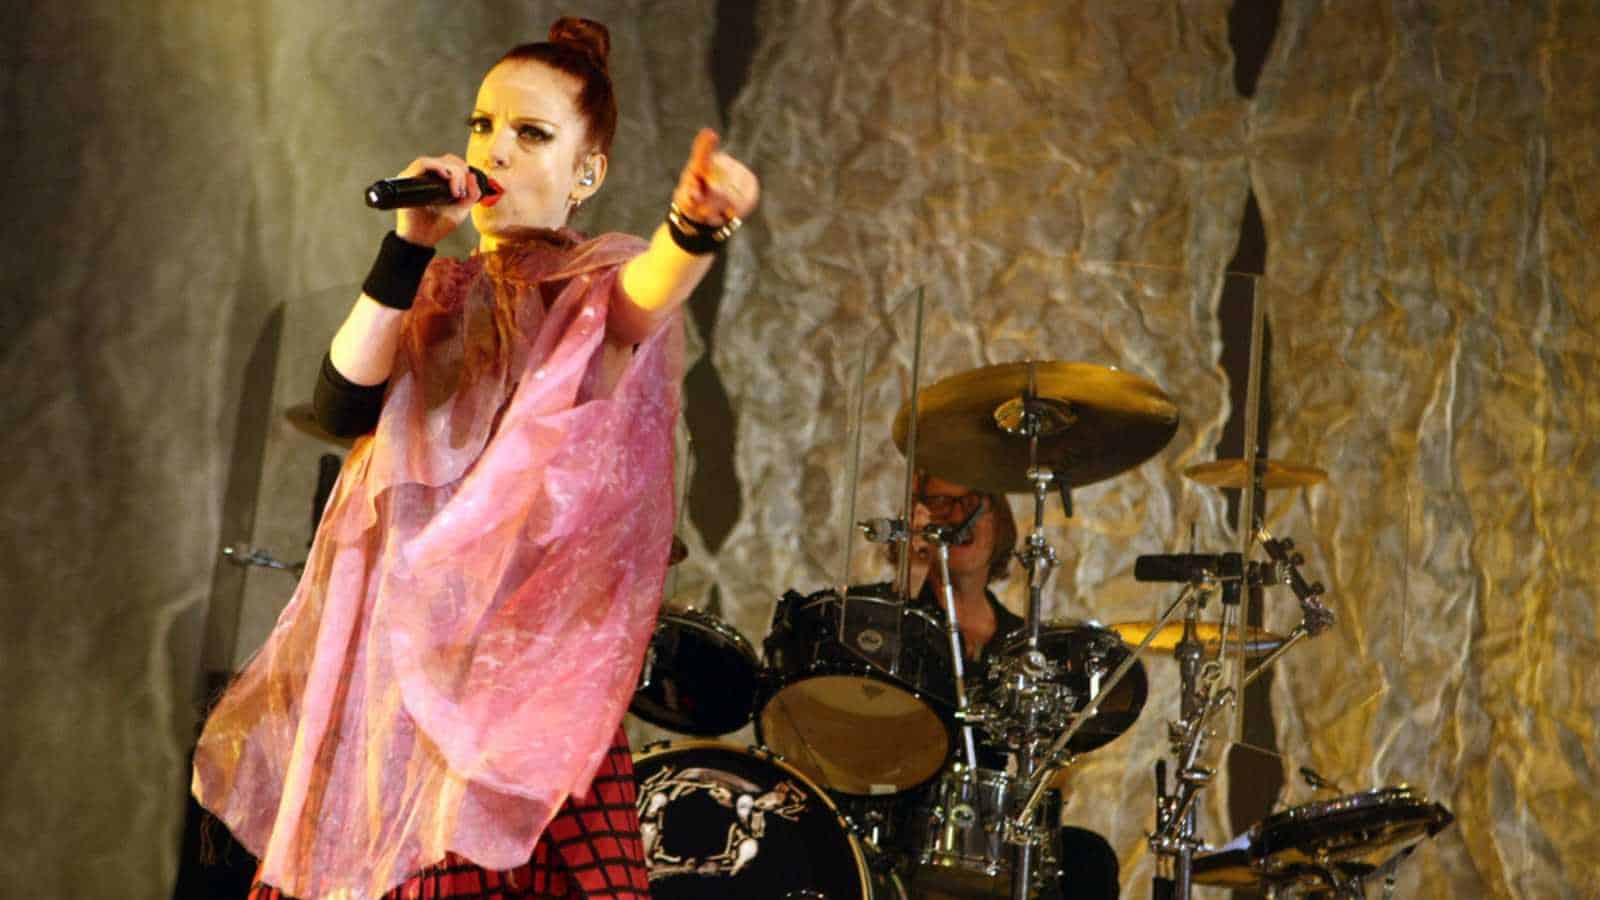 KYIV - NOVEMBER 12: Shirley Manson from GARBAGE performs as part of the 2012 tour, on stage at Sport`s Palace on November 12, 2012 in Kyiv, Ukraine.